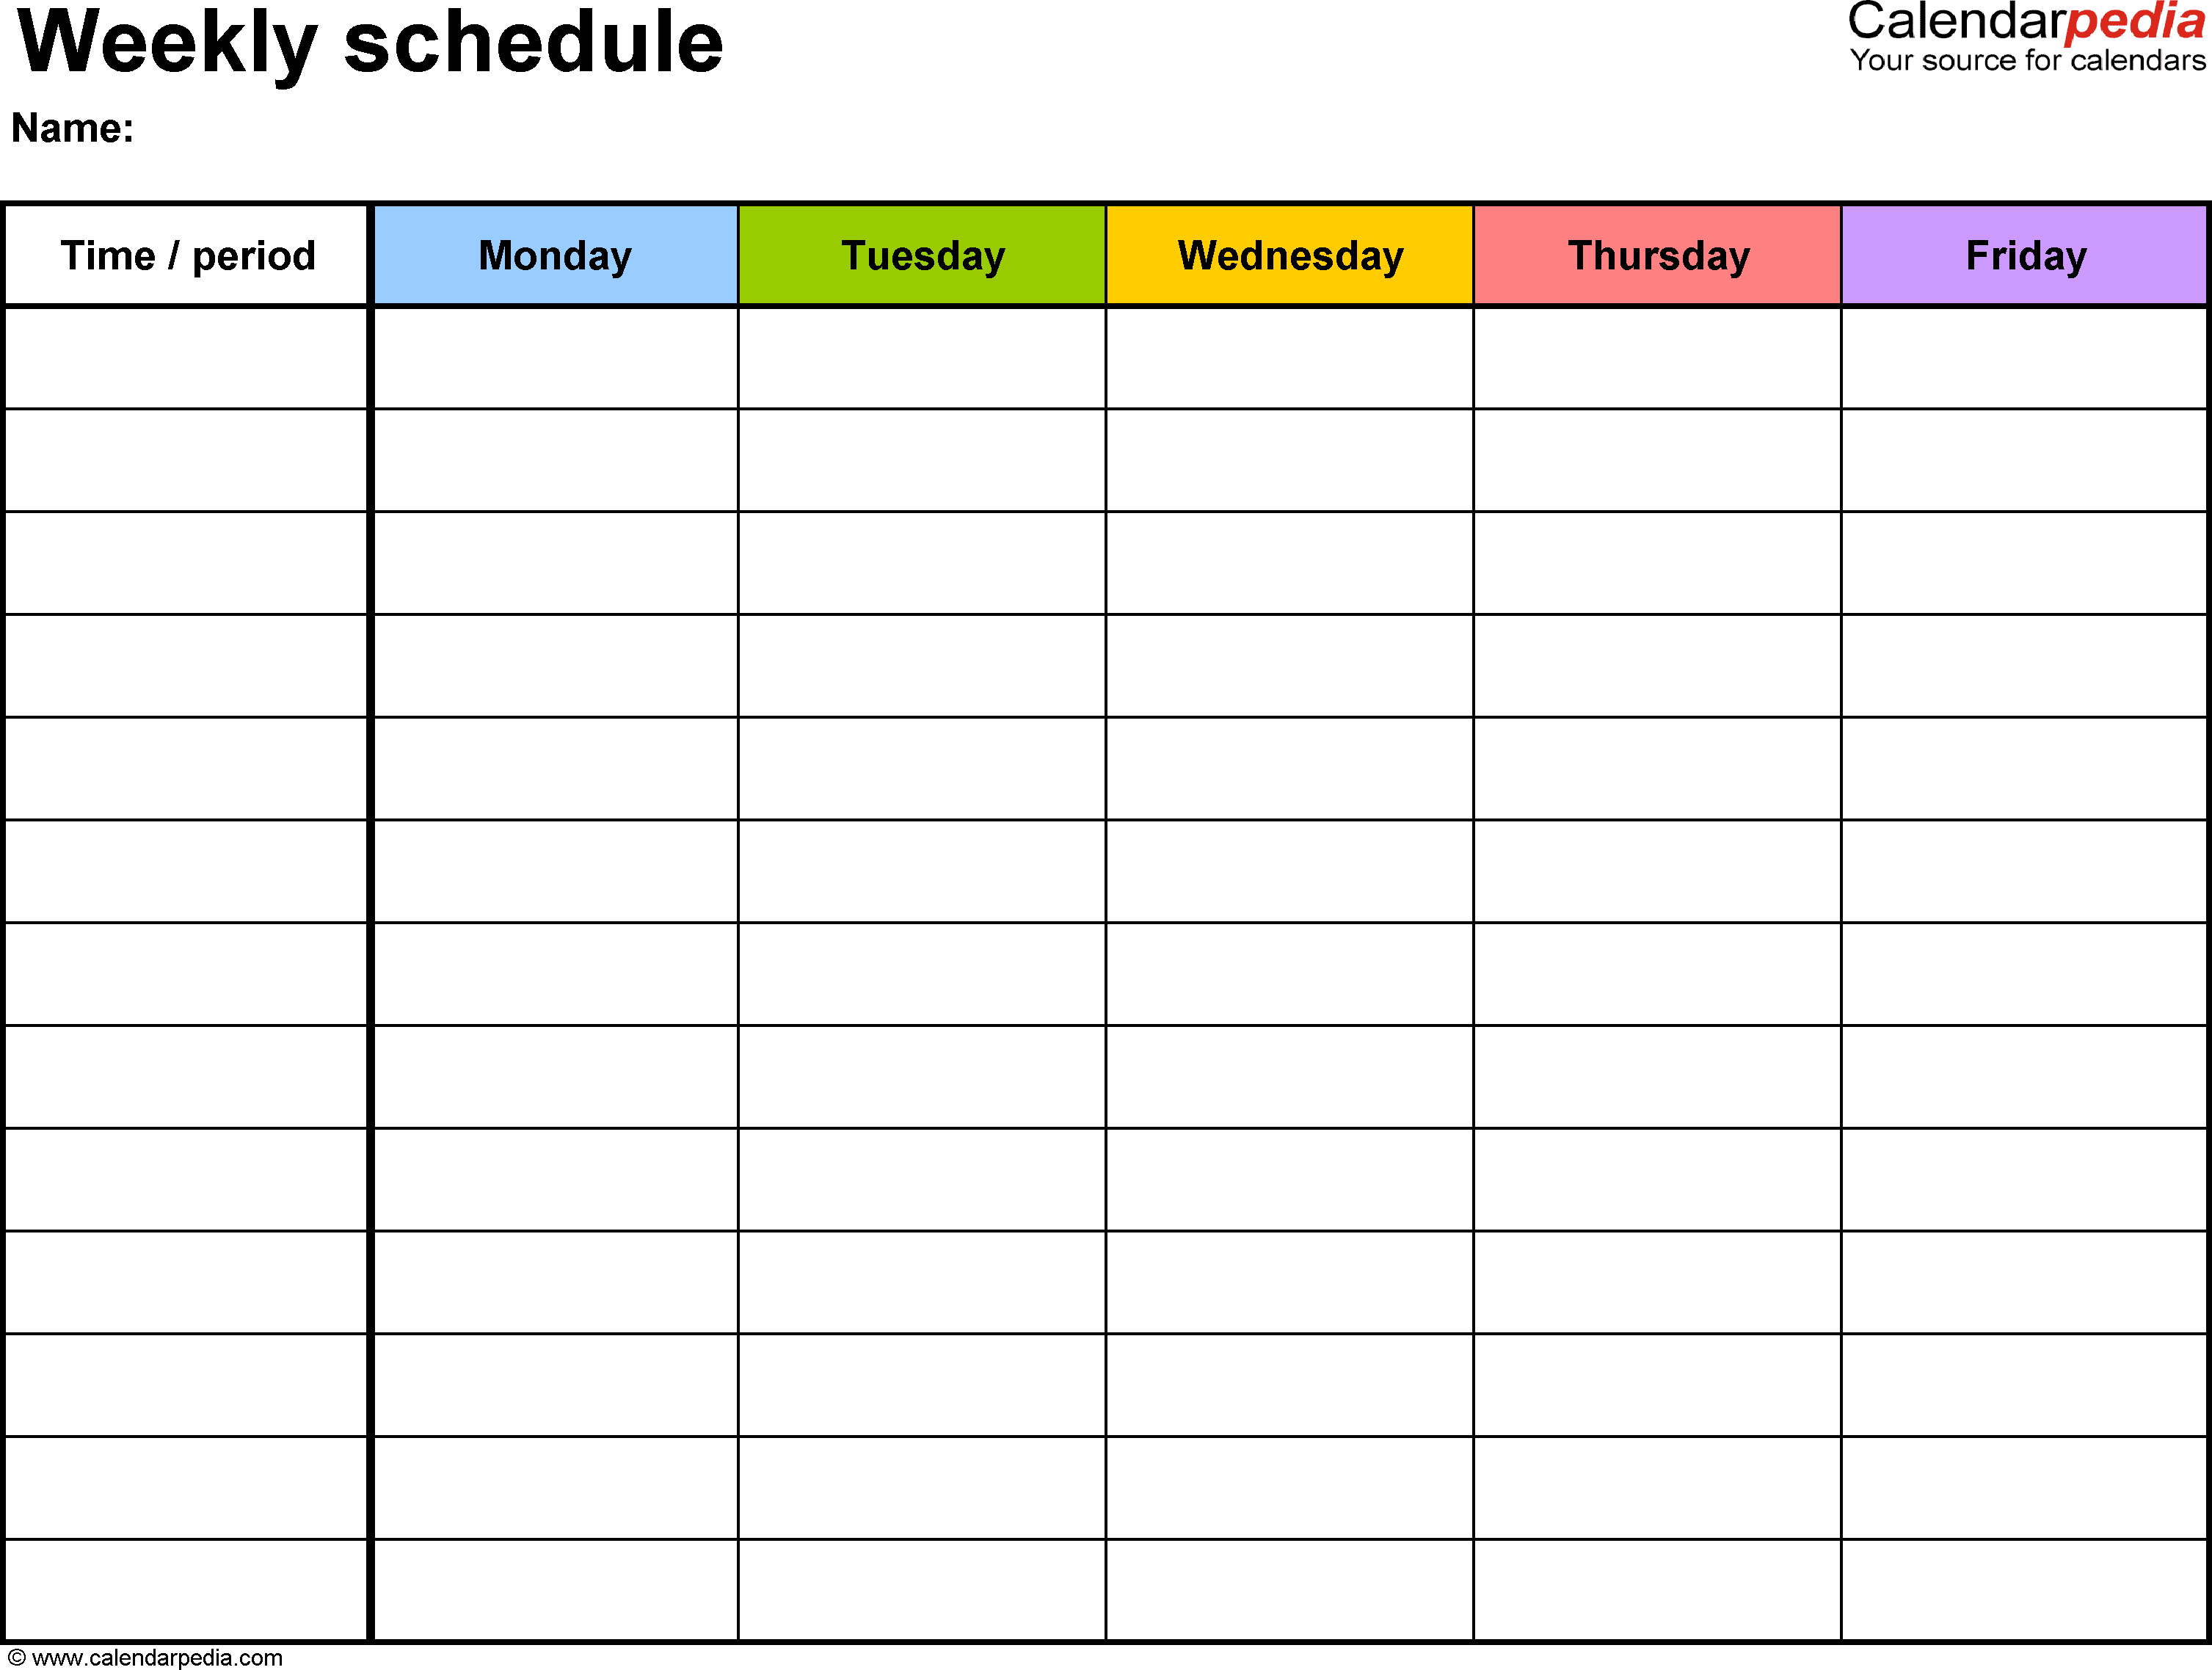 Free Weekly Schedule Templates For Word - 18 Templates - Free Printable Academic Planner